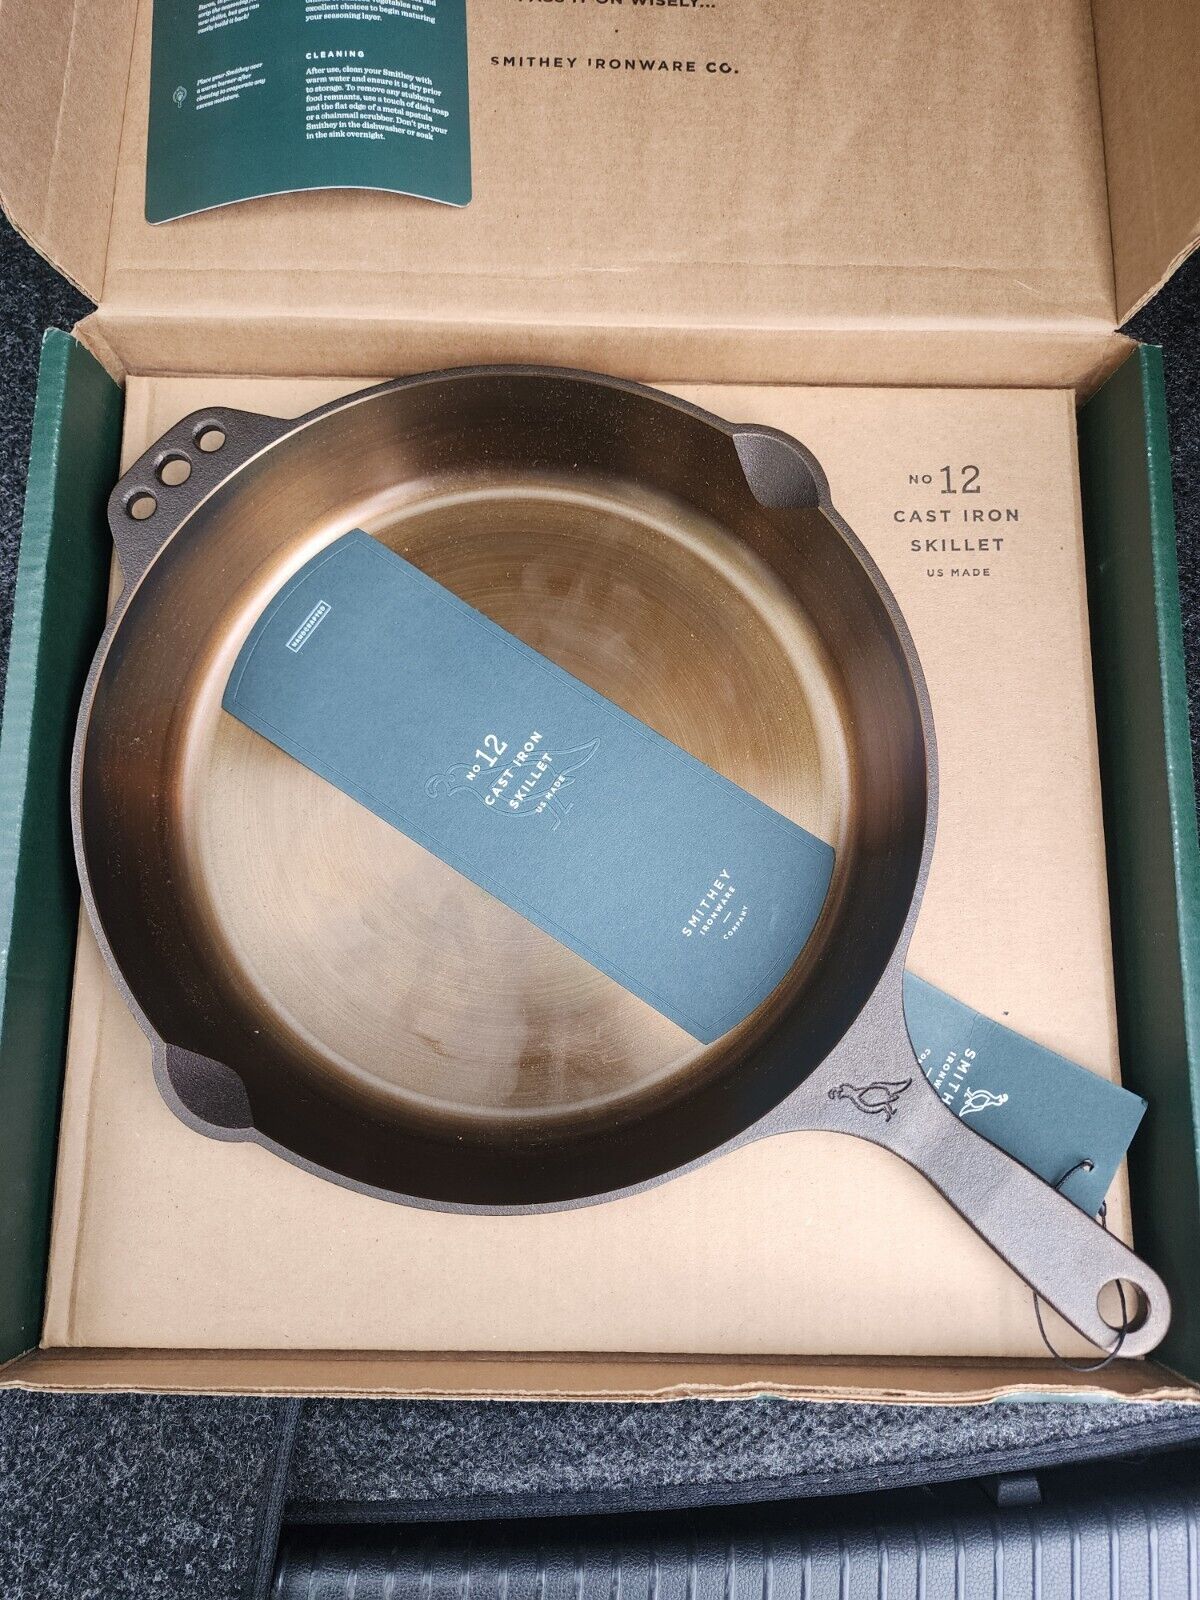 Smithey Ironware Cast Iron #12 Skillet New In Box  (Has Engraving)